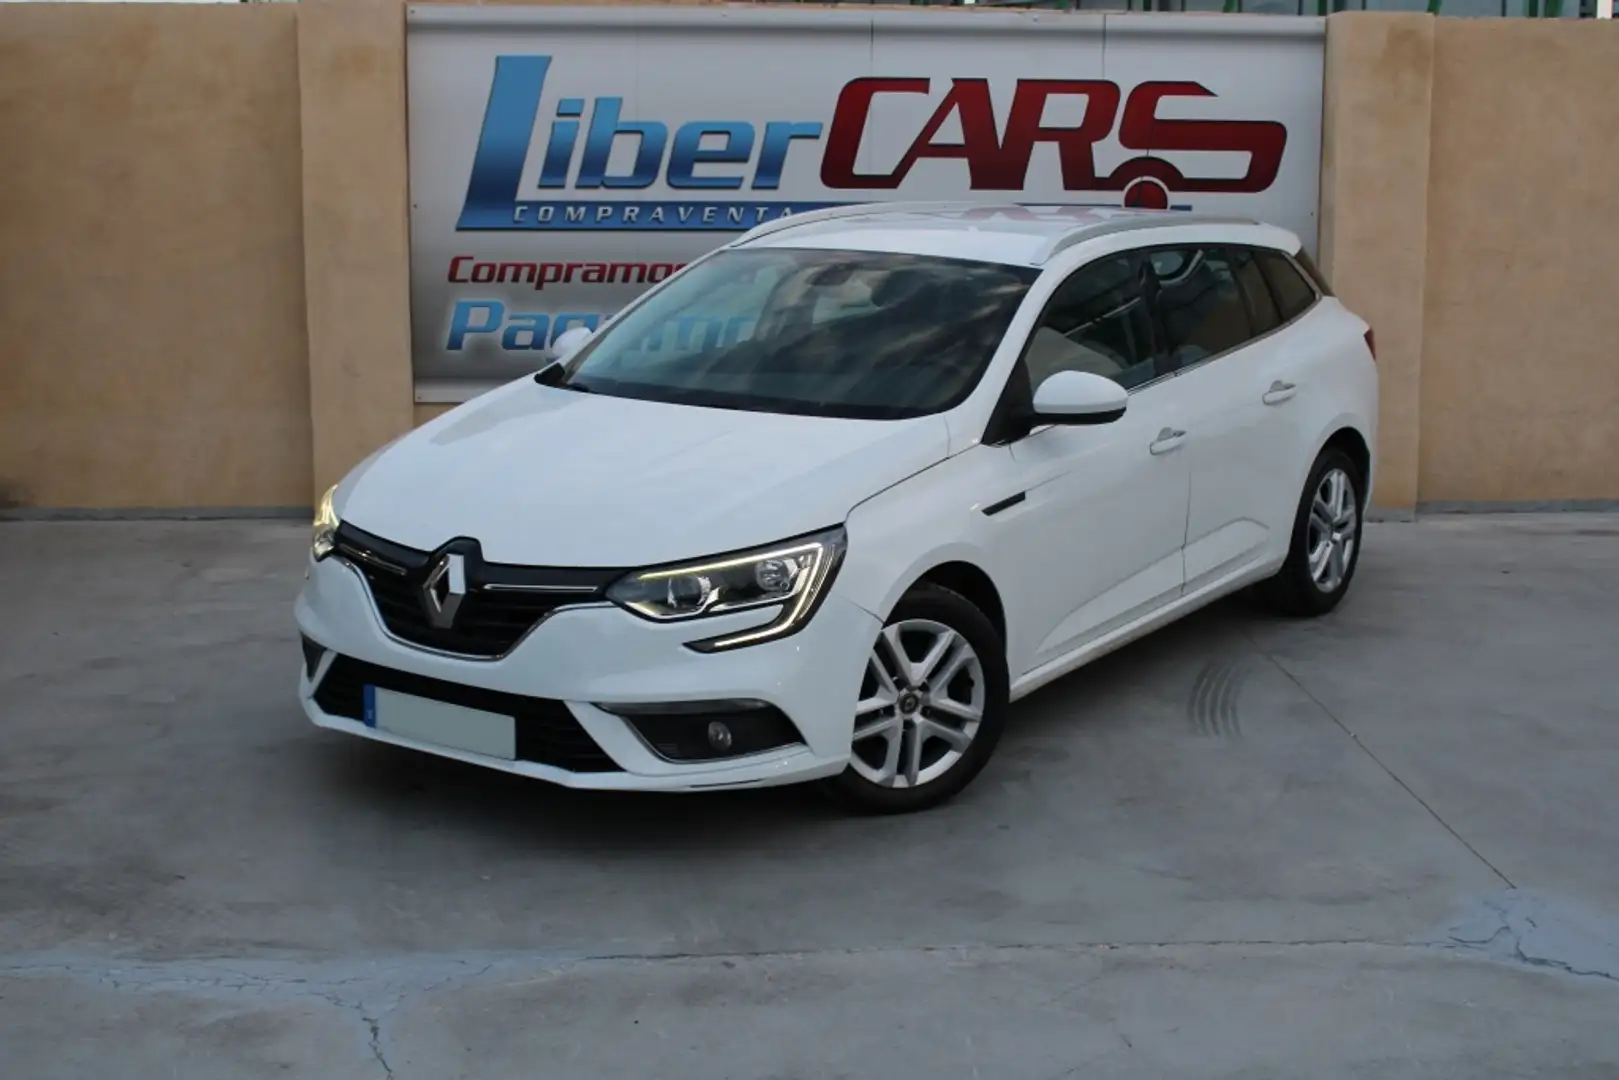 Renault Megane S.T. 1.5dCi Energy Business 81kW Weiß - 2